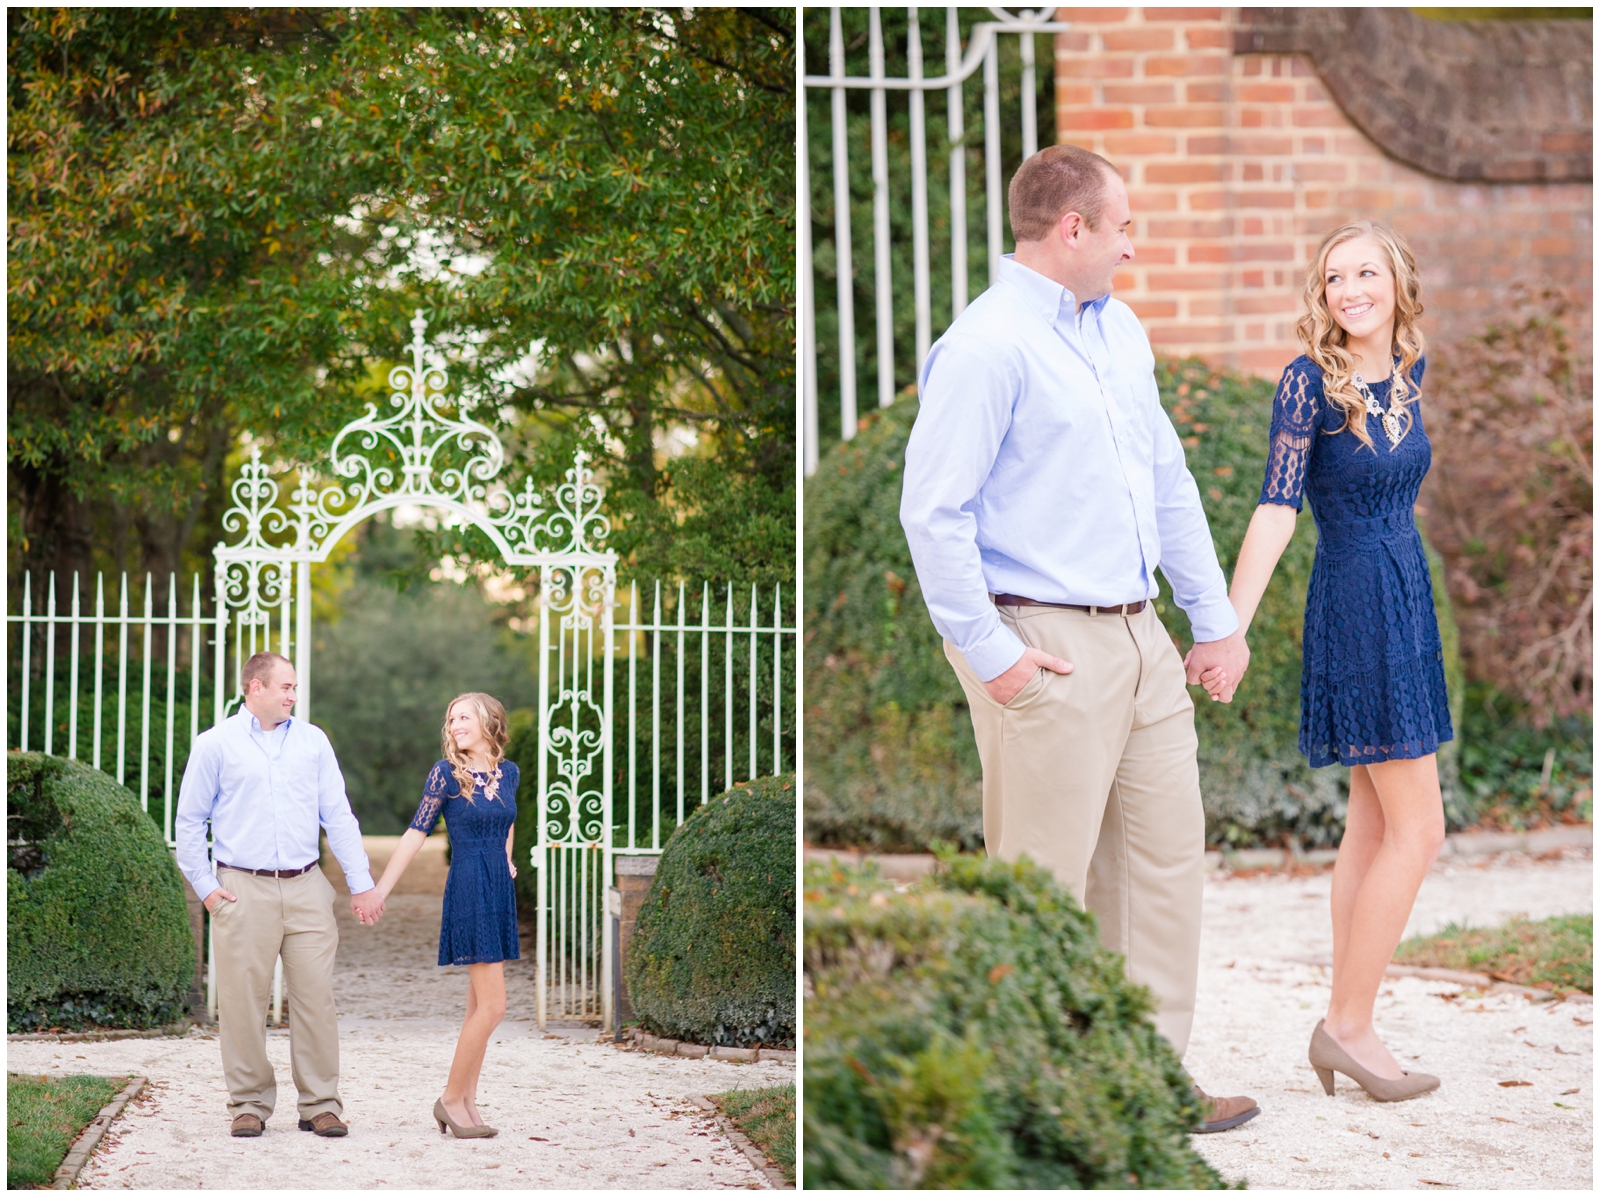 autumn fall leaves colonial williamsburg governor's palace engagement session